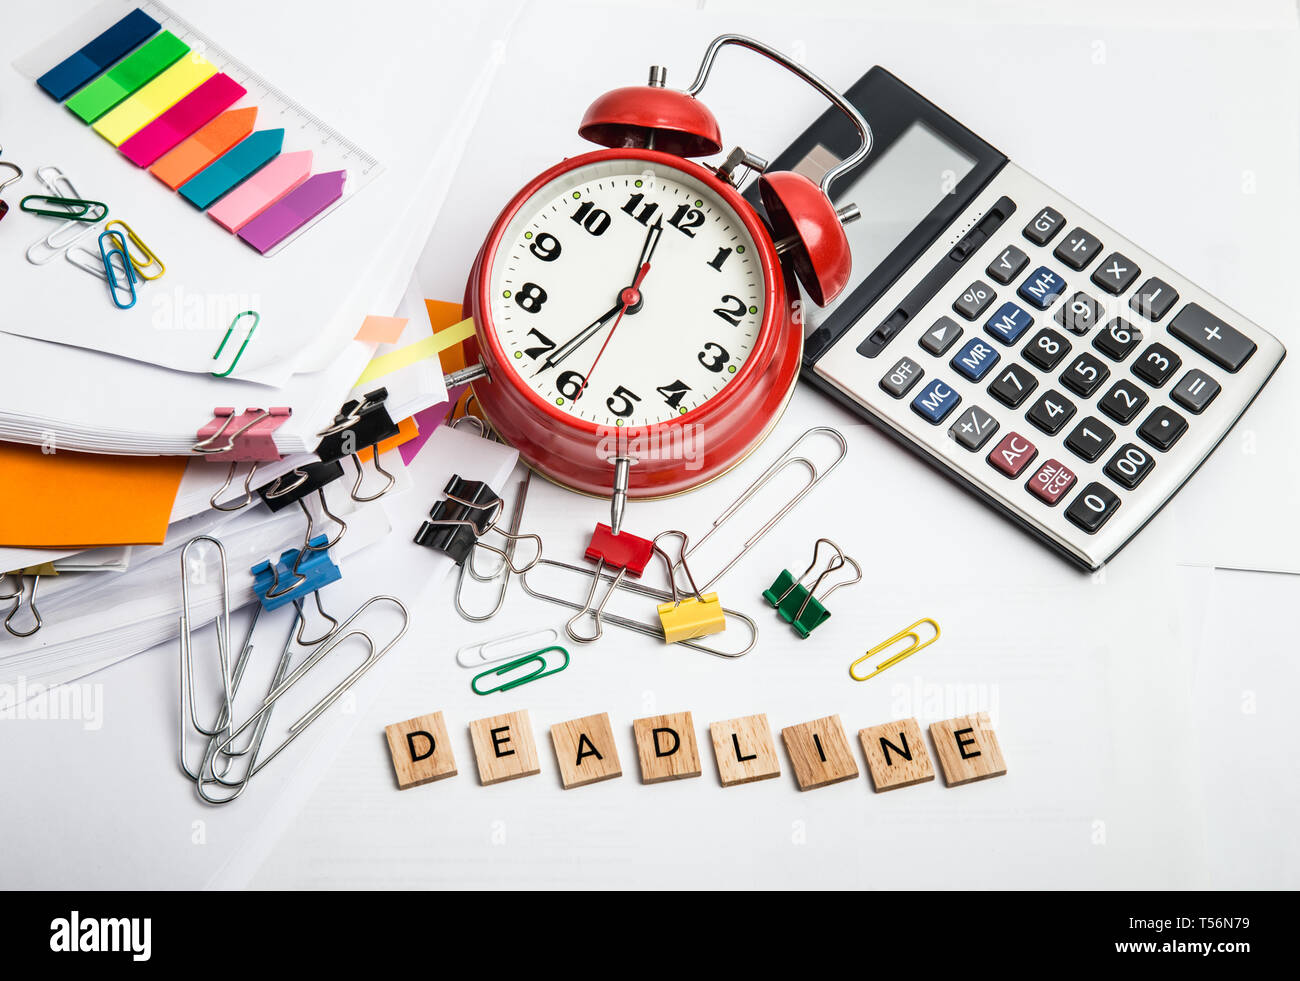 Time management concept. Composition with documents, stationary and alarm clock on table Stock Photo